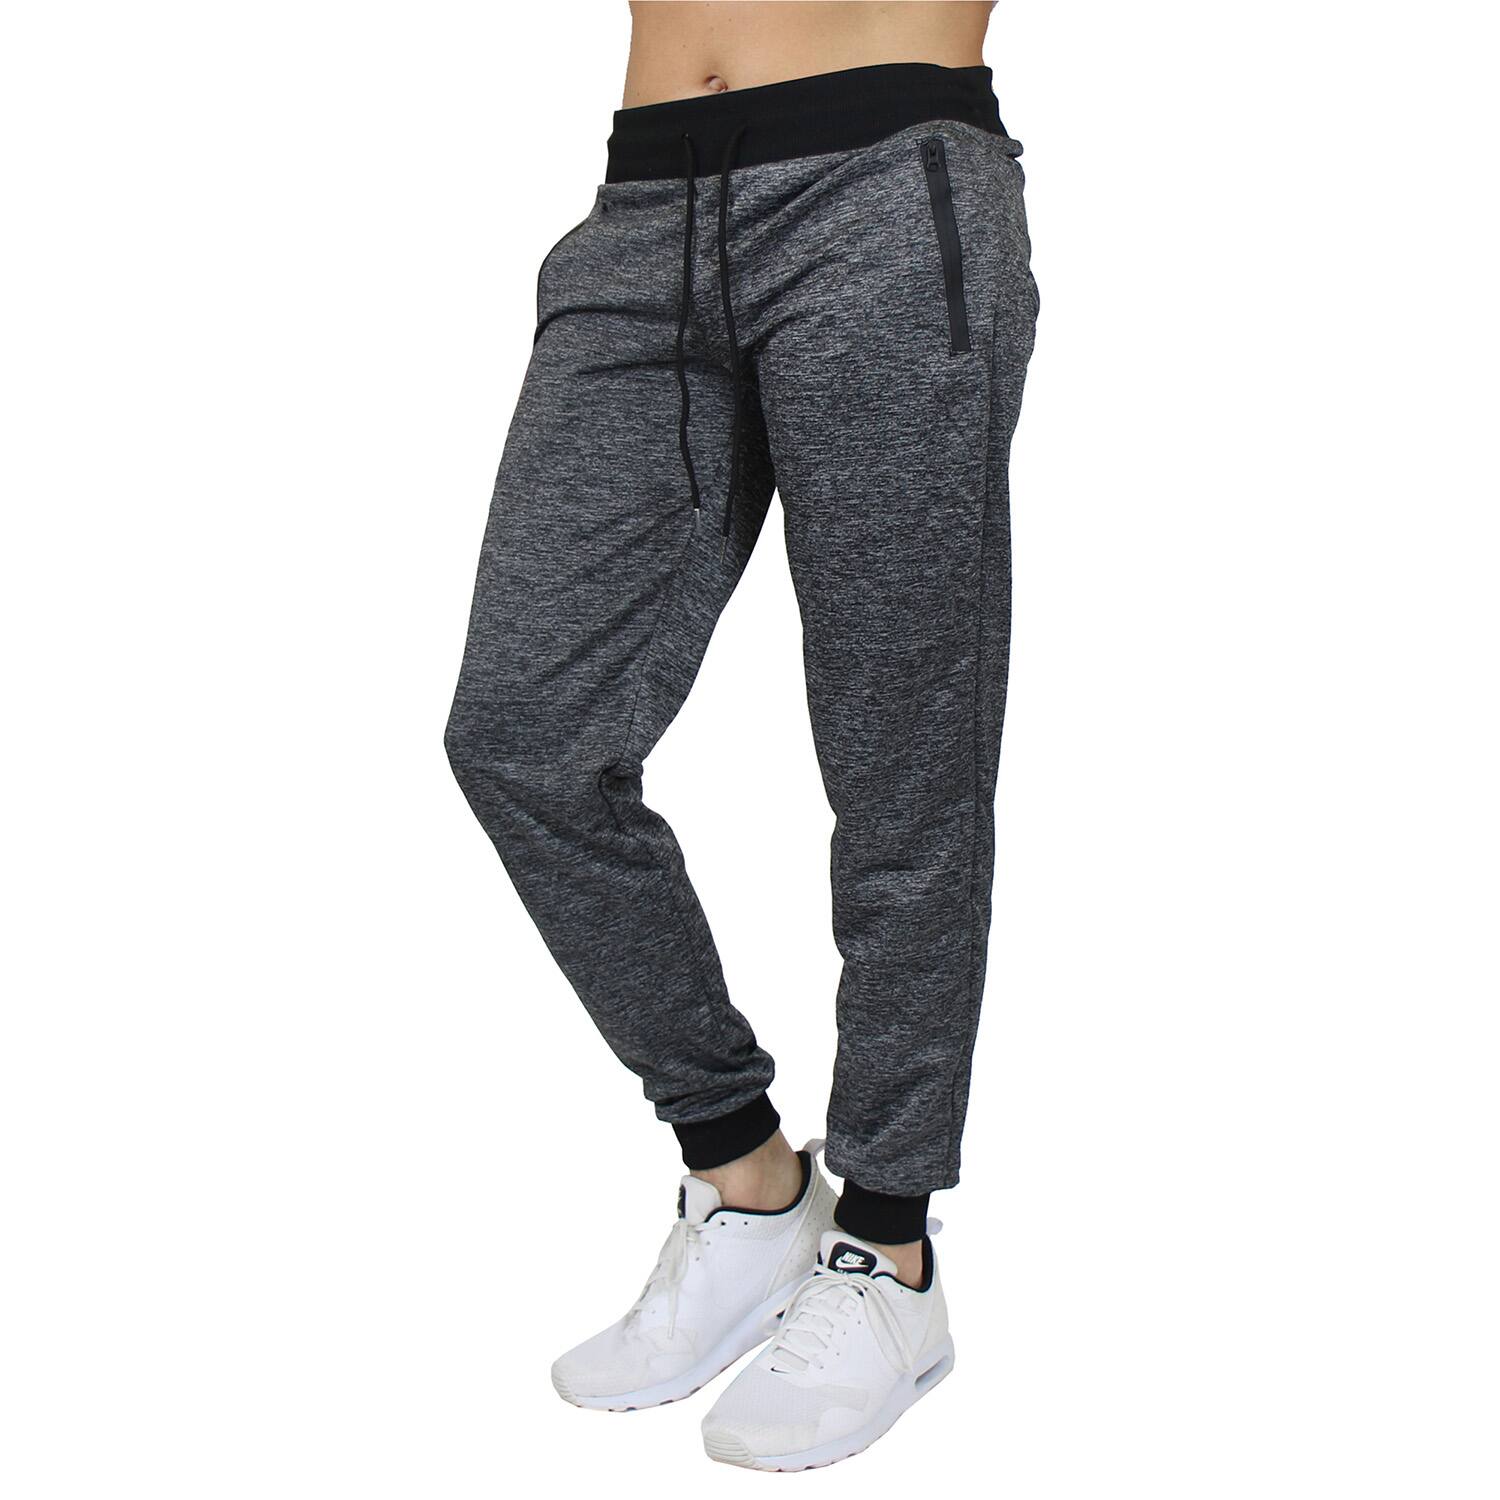 Women's French Terry Fashion Joggers With Tech Zipper Pockets $11.24 + Free shipping